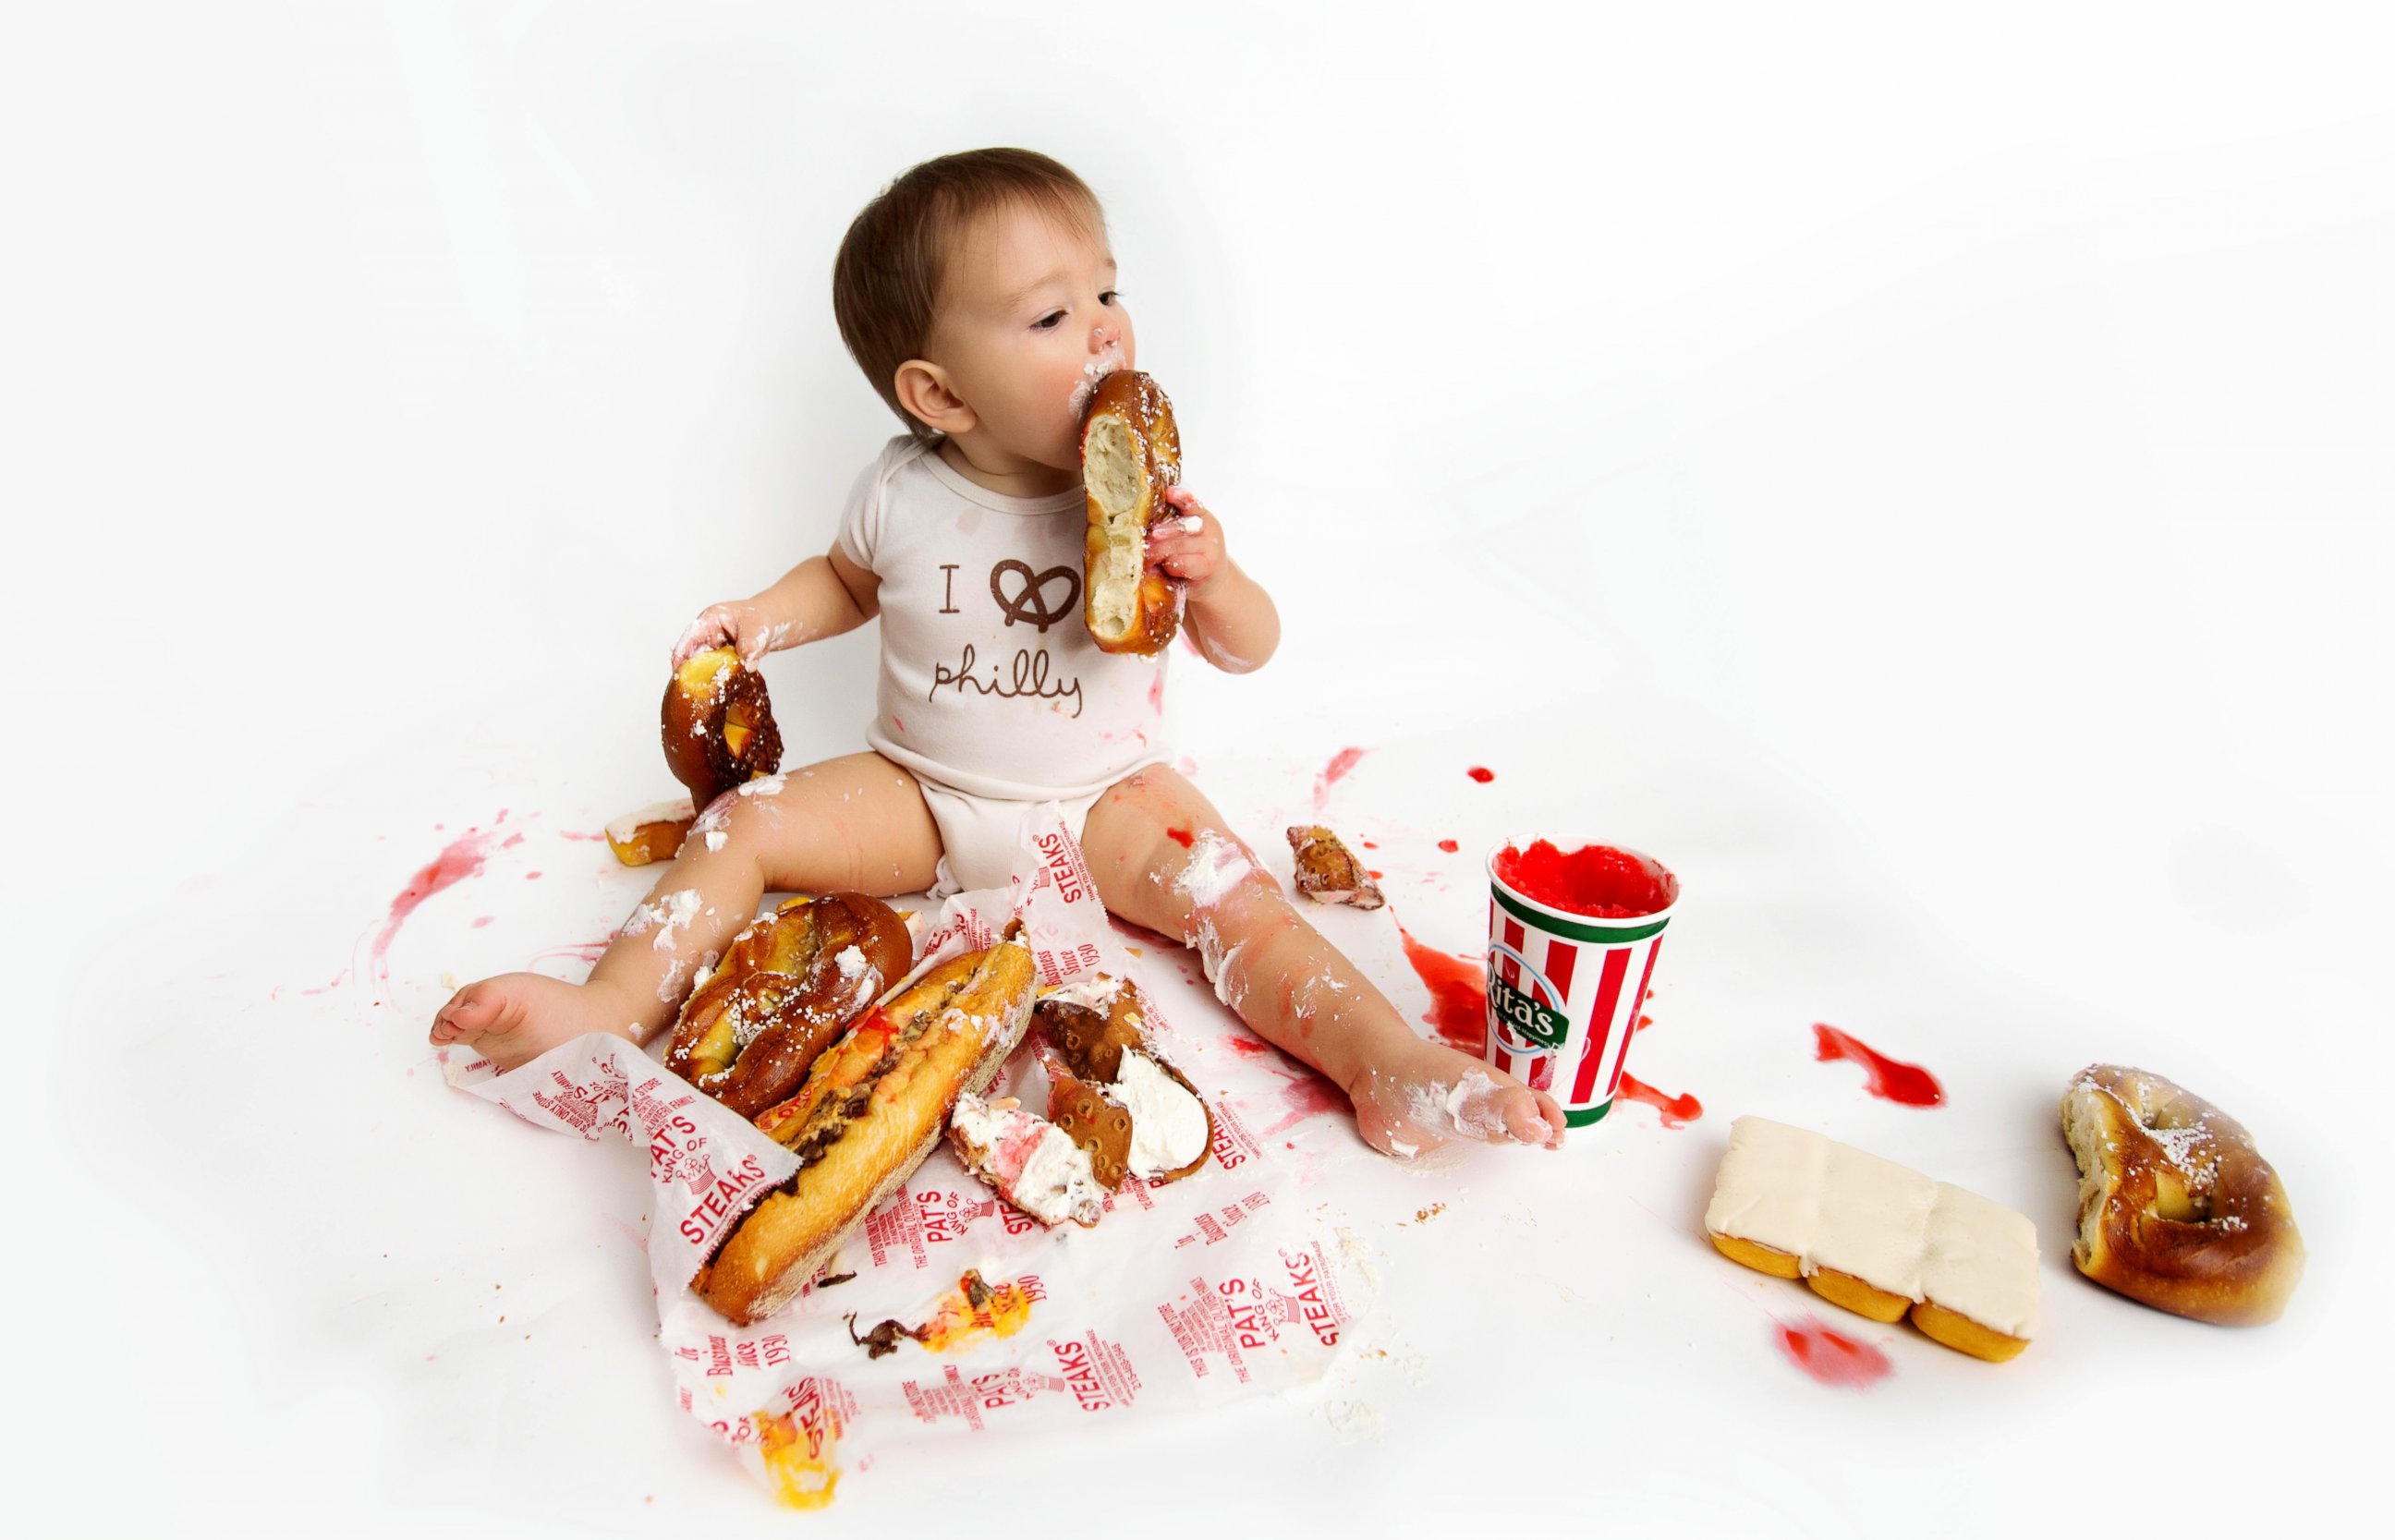 PHOTO: Matthew Dittrich celebrated his first birthday with a Philly-themed food smash.